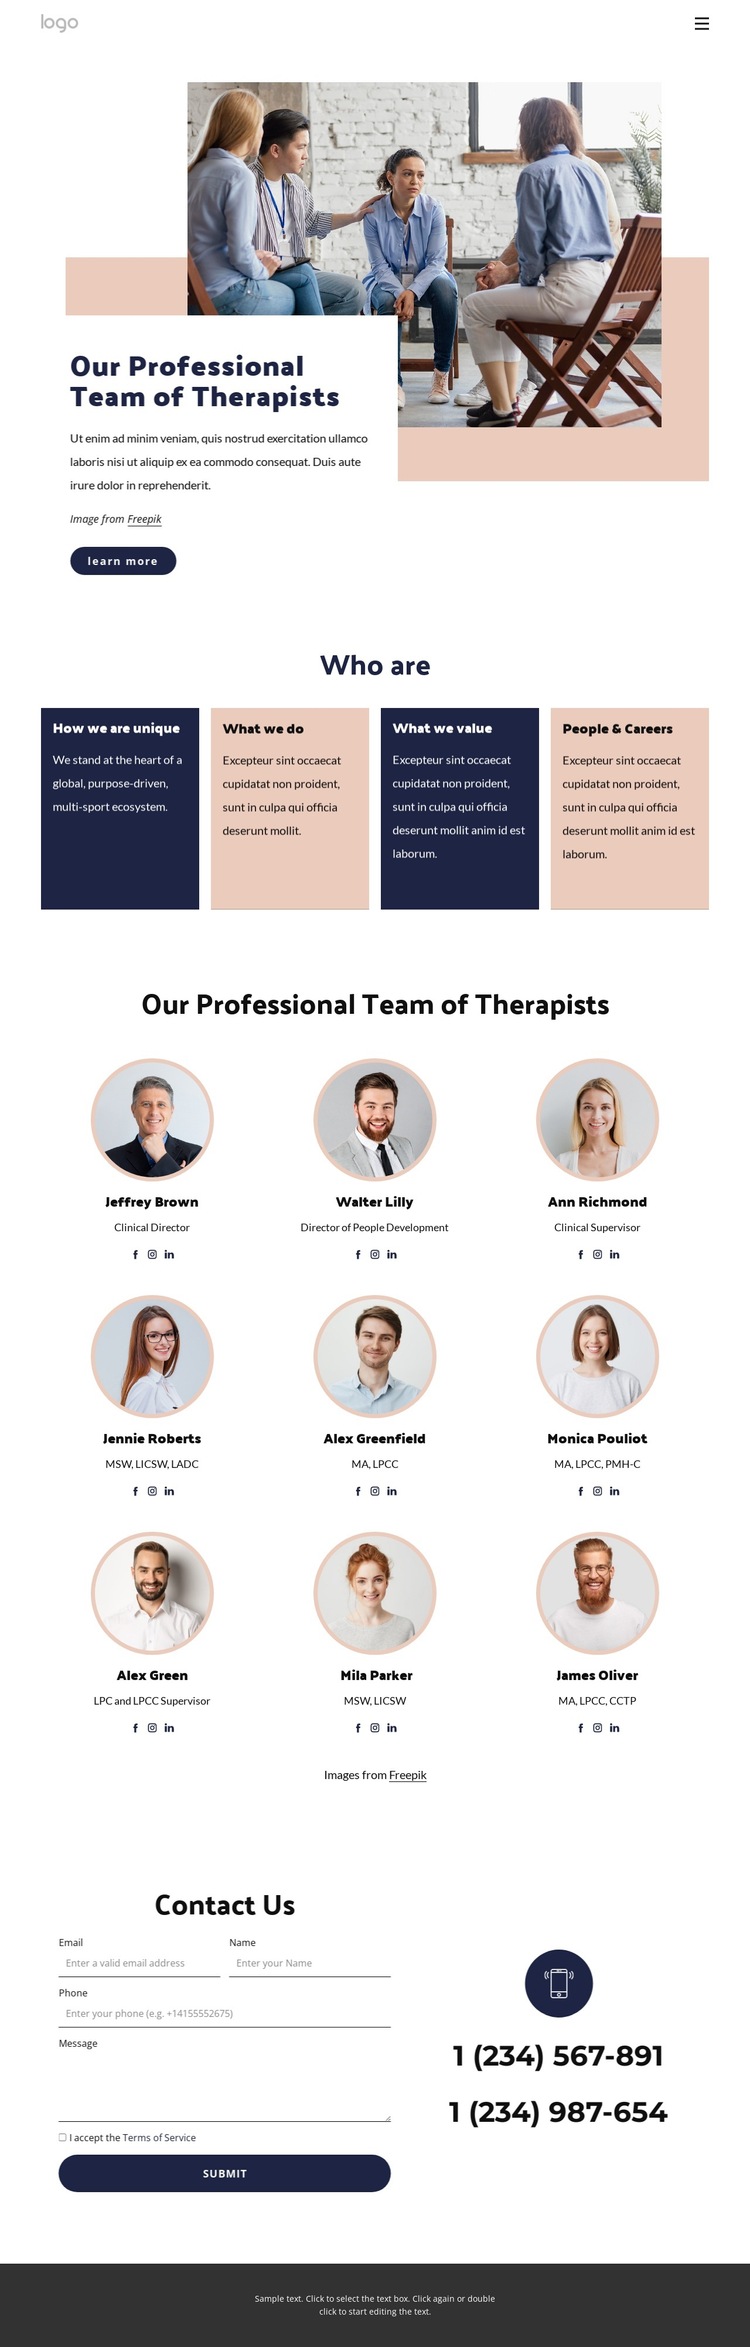 Our professional team of therapists HTML5 Template